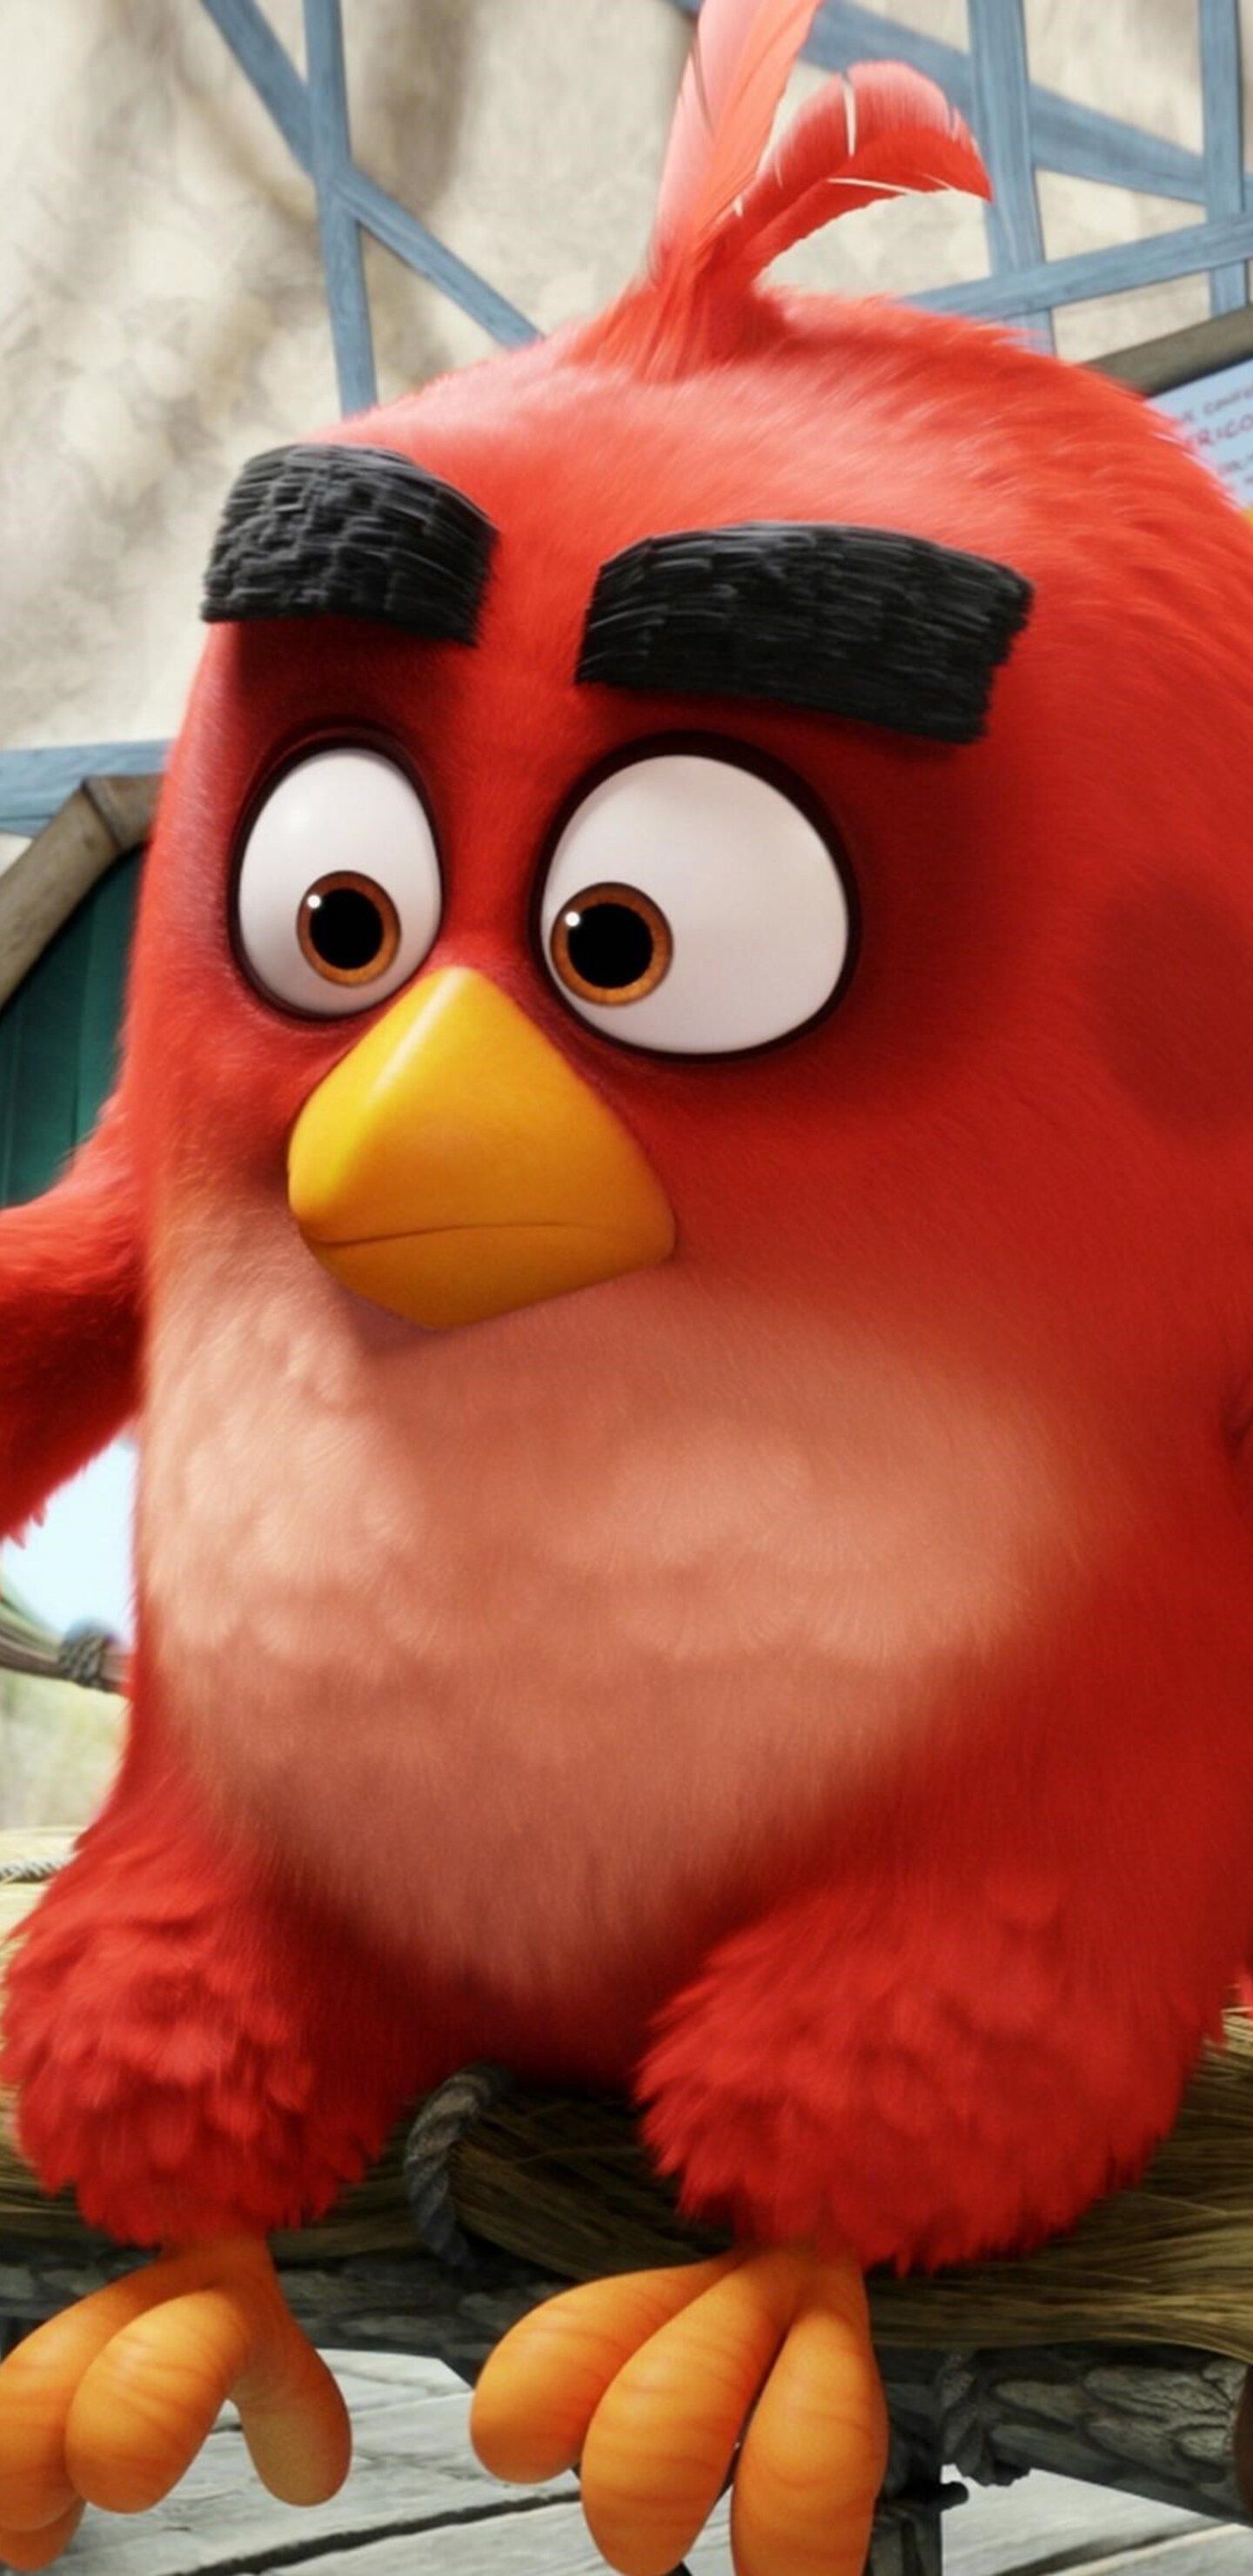 Red The Angry Birds Samsung Galaxy Note S S S